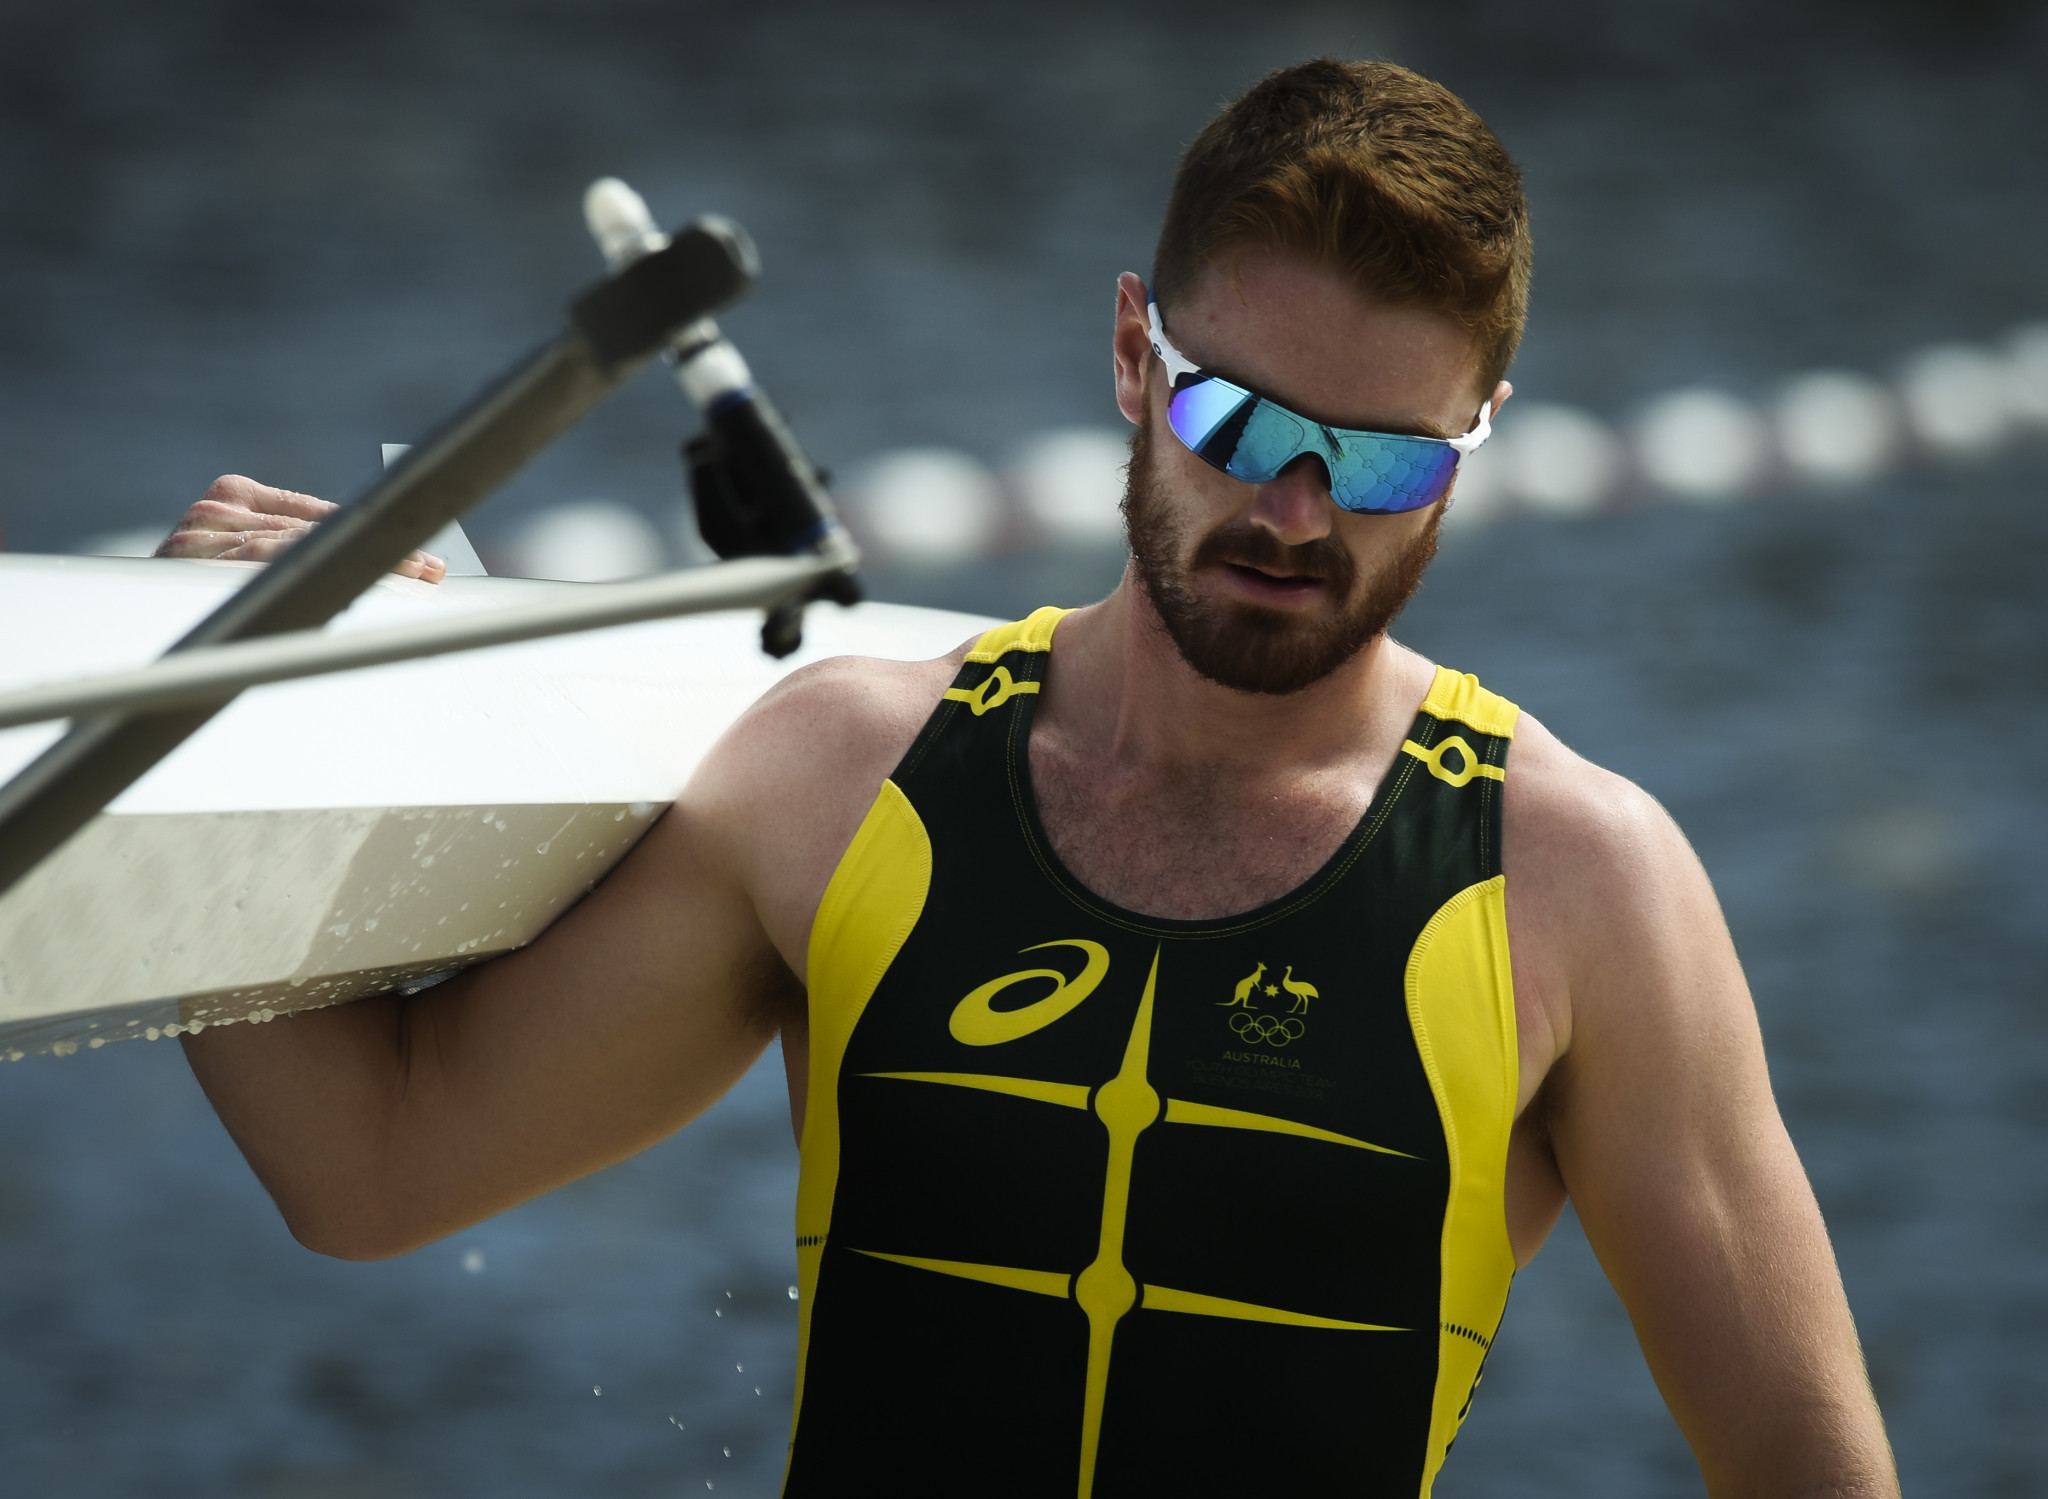 Youth Olympic medallist Cormac Kennedy-Leverett will go in the men's single sculls ©Getty Images